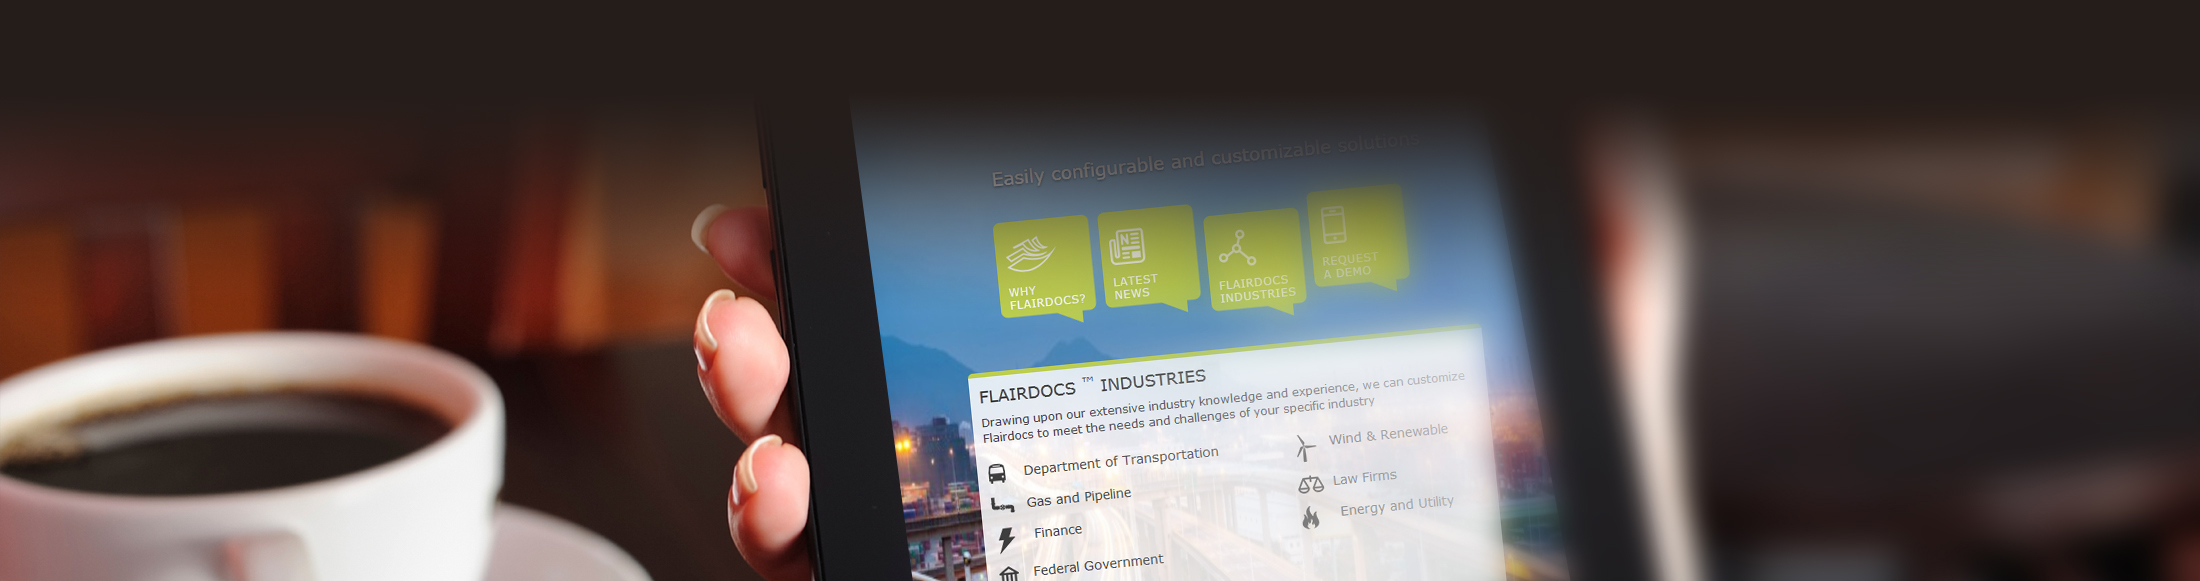 Get all news and updates of Flairdocs - Right of way management, property management